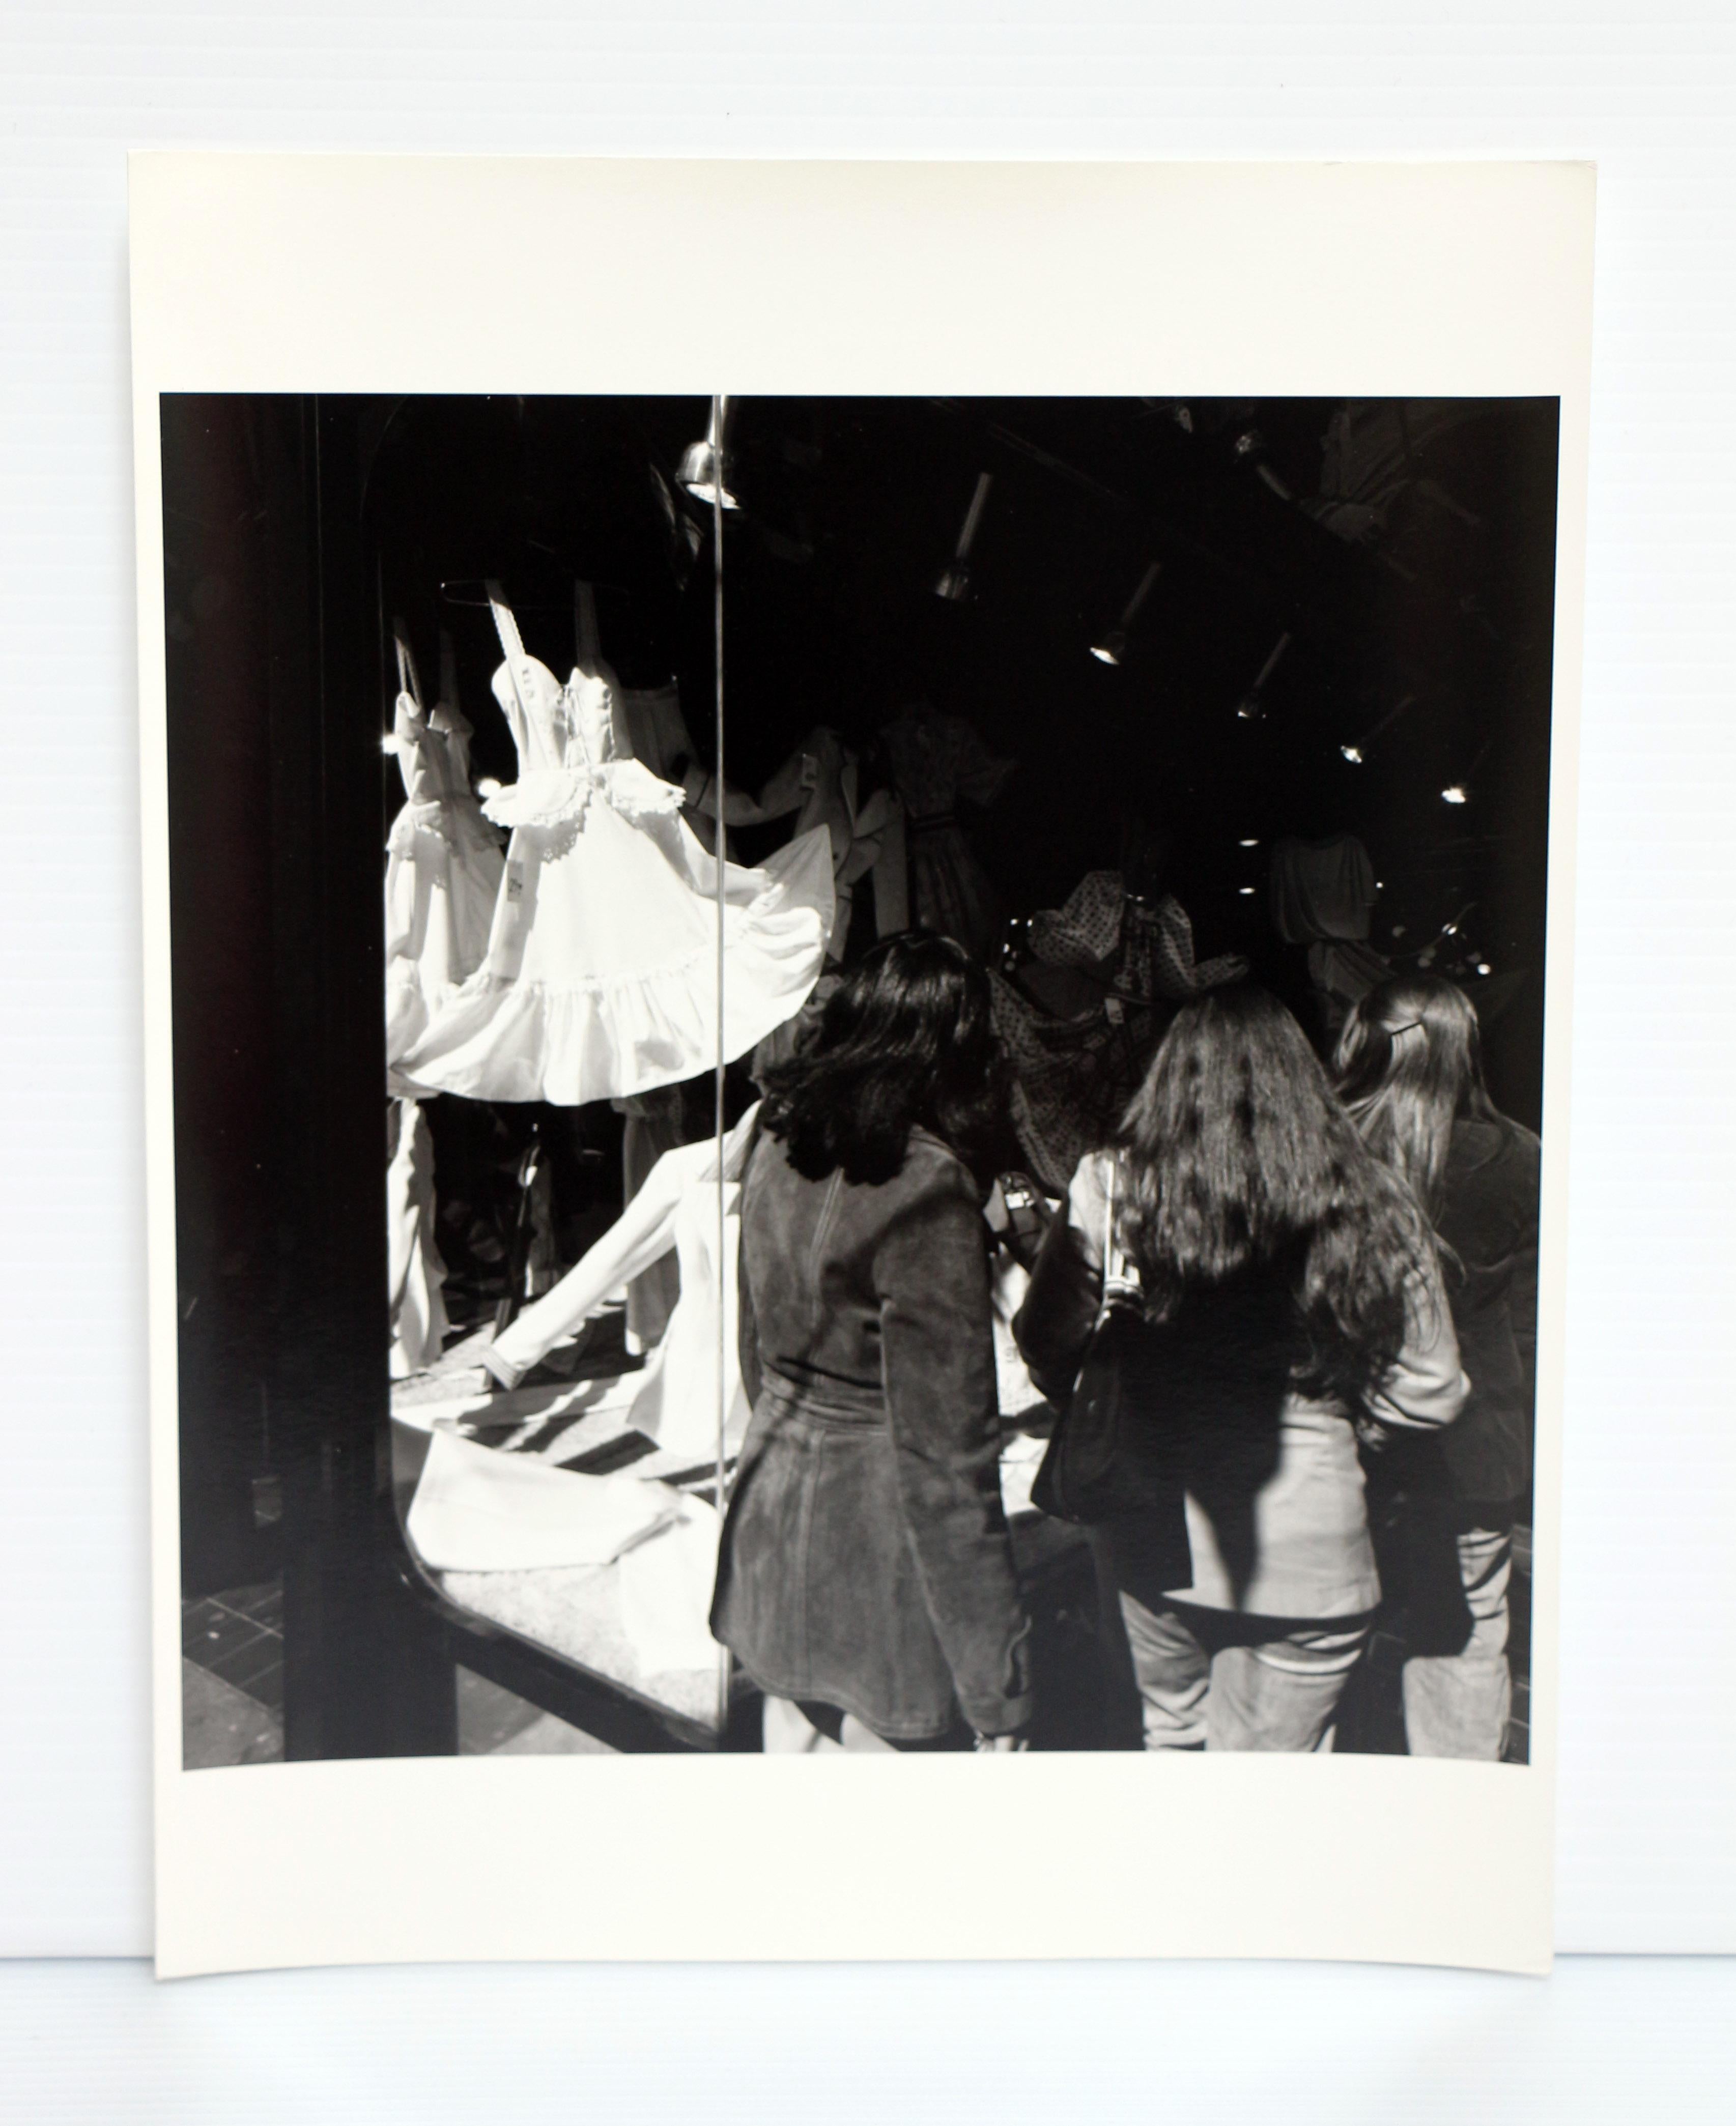 untitled, vintage black and white print of NYC storefront window and people - Academic Photograph by Mark Feldstein